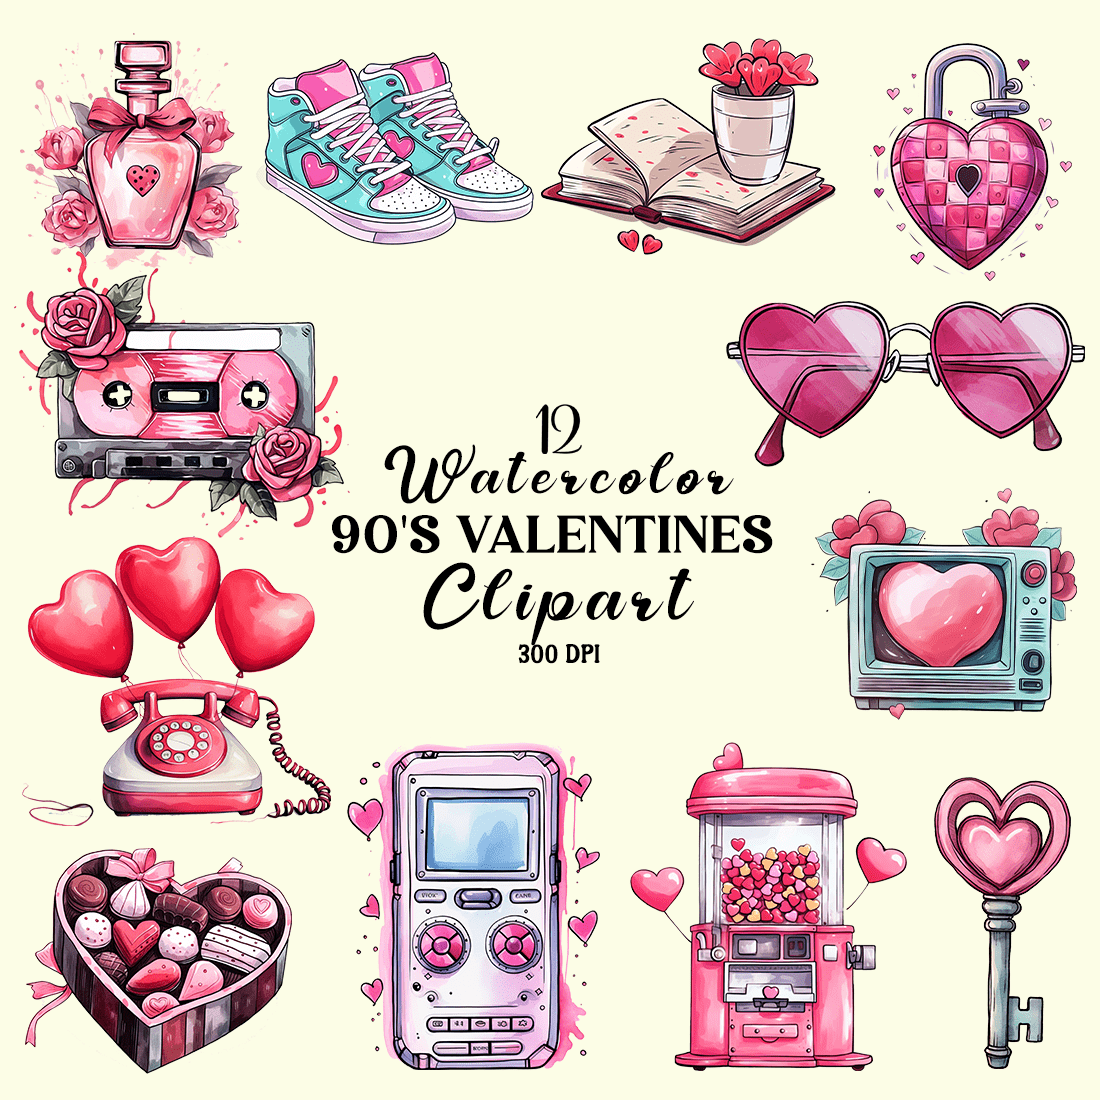 Watercolor 90's Valentines Clipart cover image.